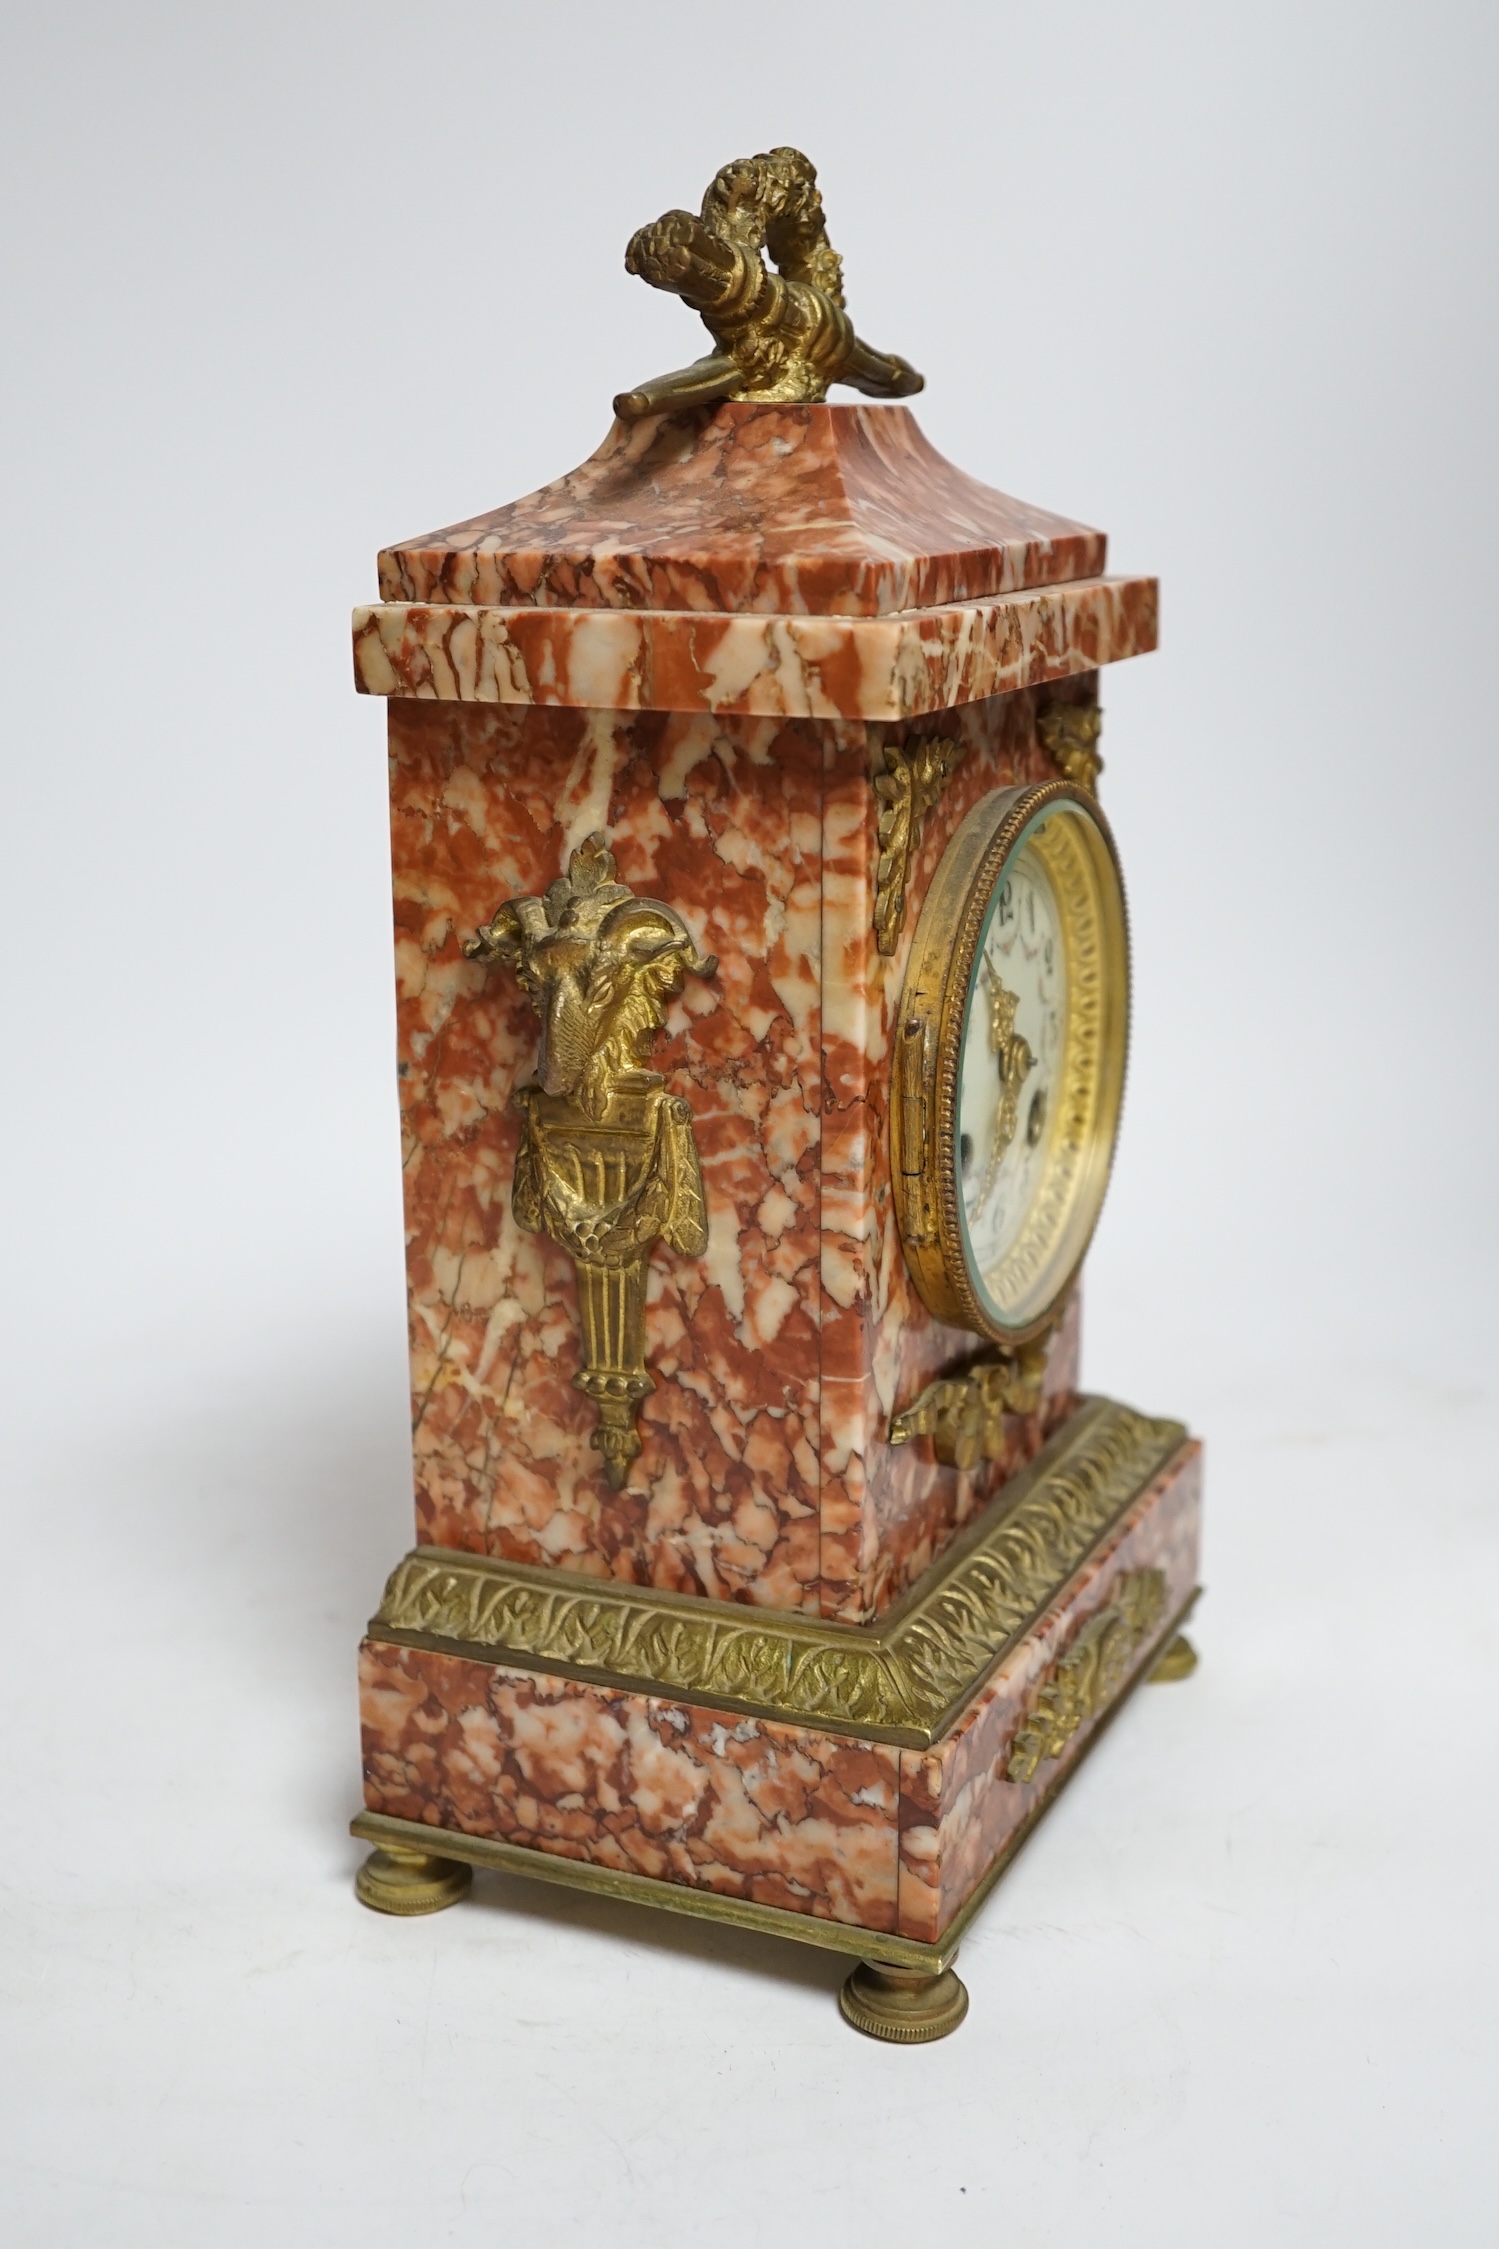 A mid-19th century rouge marble mantel clock, L. Marti et Cie Medaille D’argent two train movement, striking on a bell (bell missing), 29.5cm